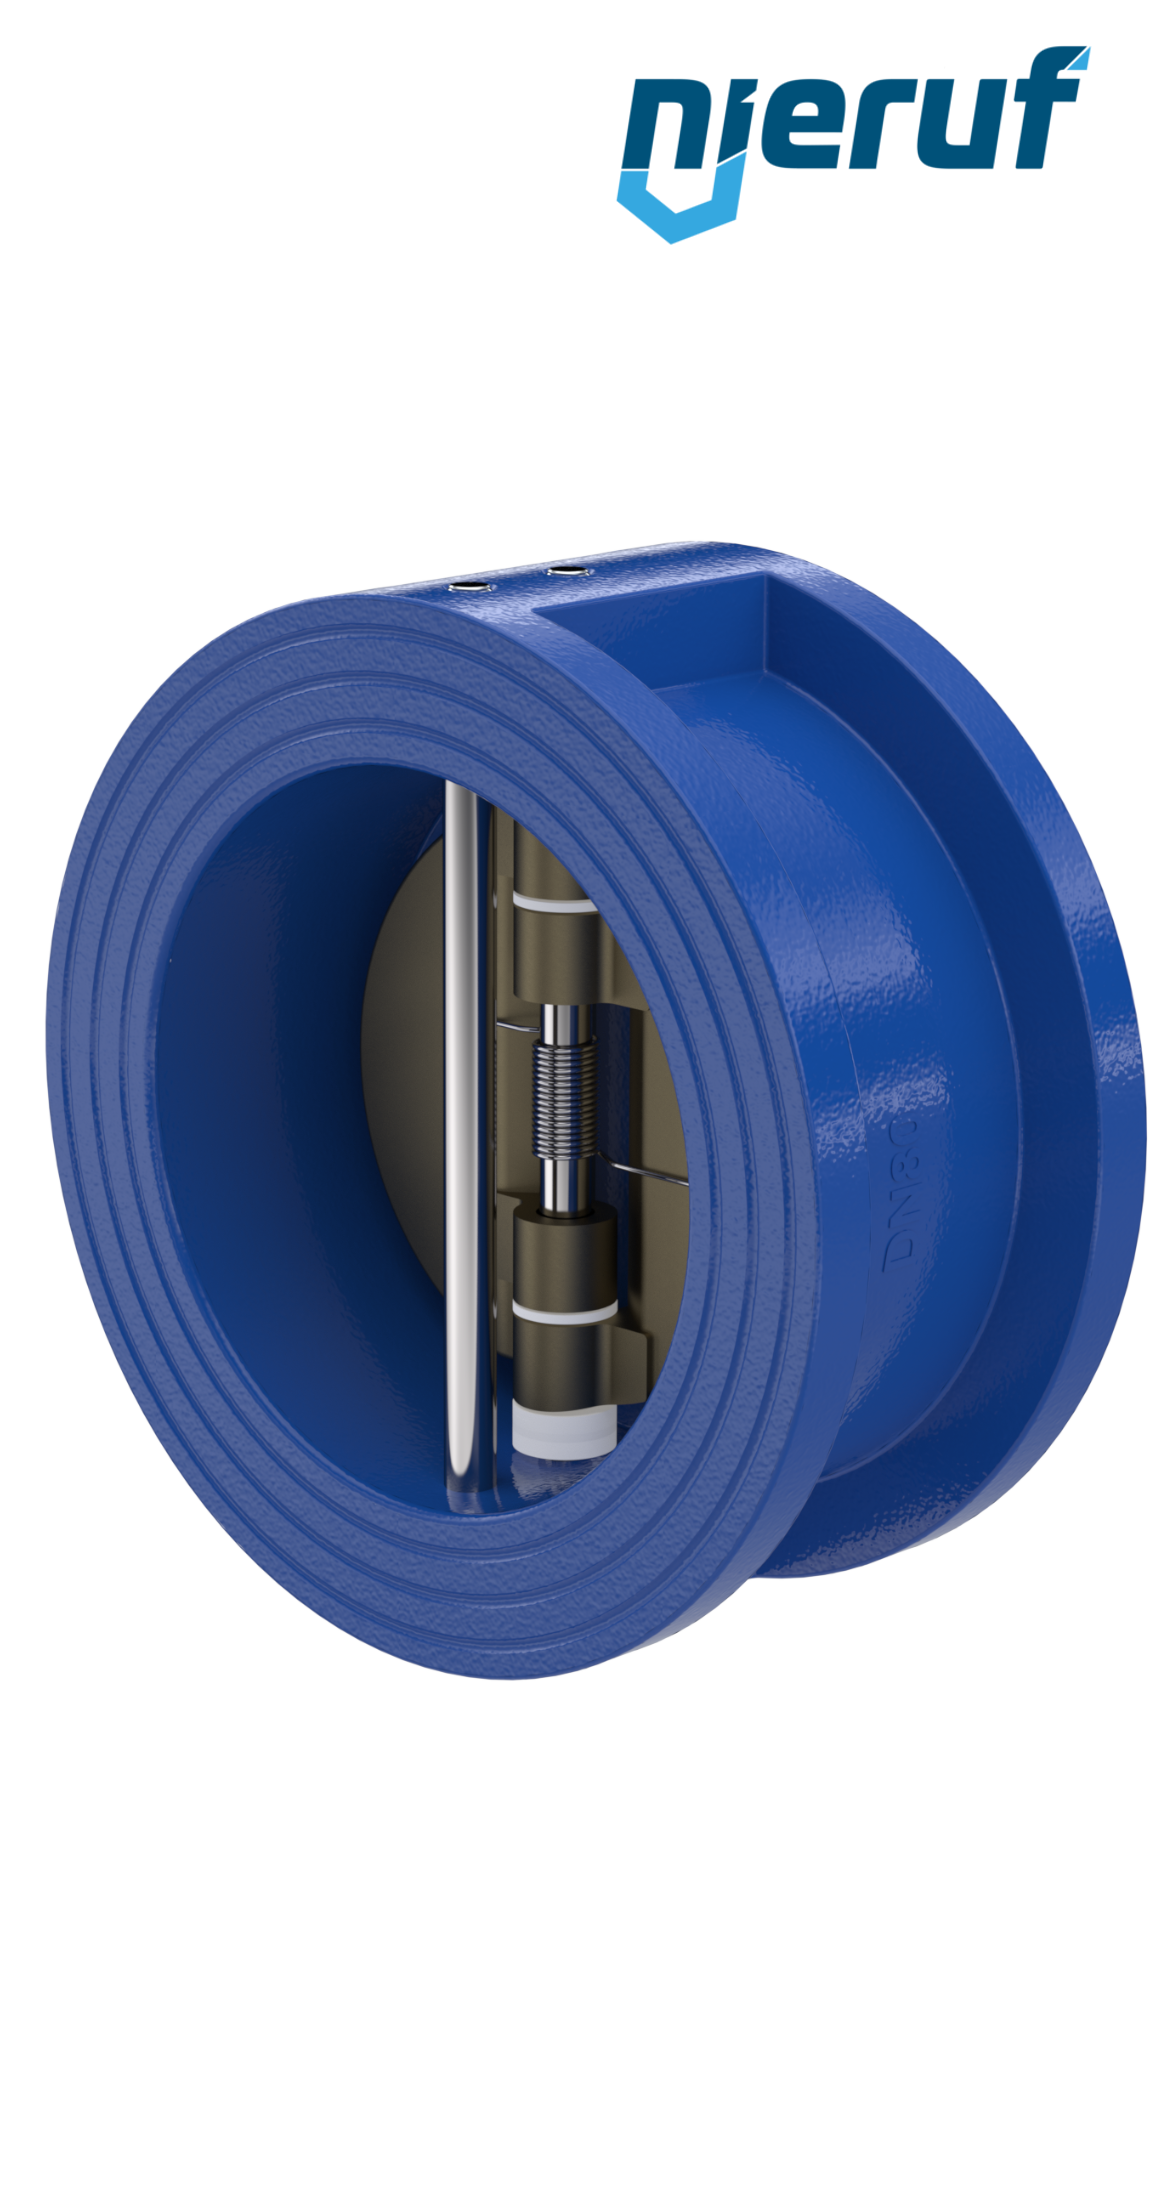 dual plate check valve DN80 DR04 GGG40 epoxyd plated blue 180µm EPDM